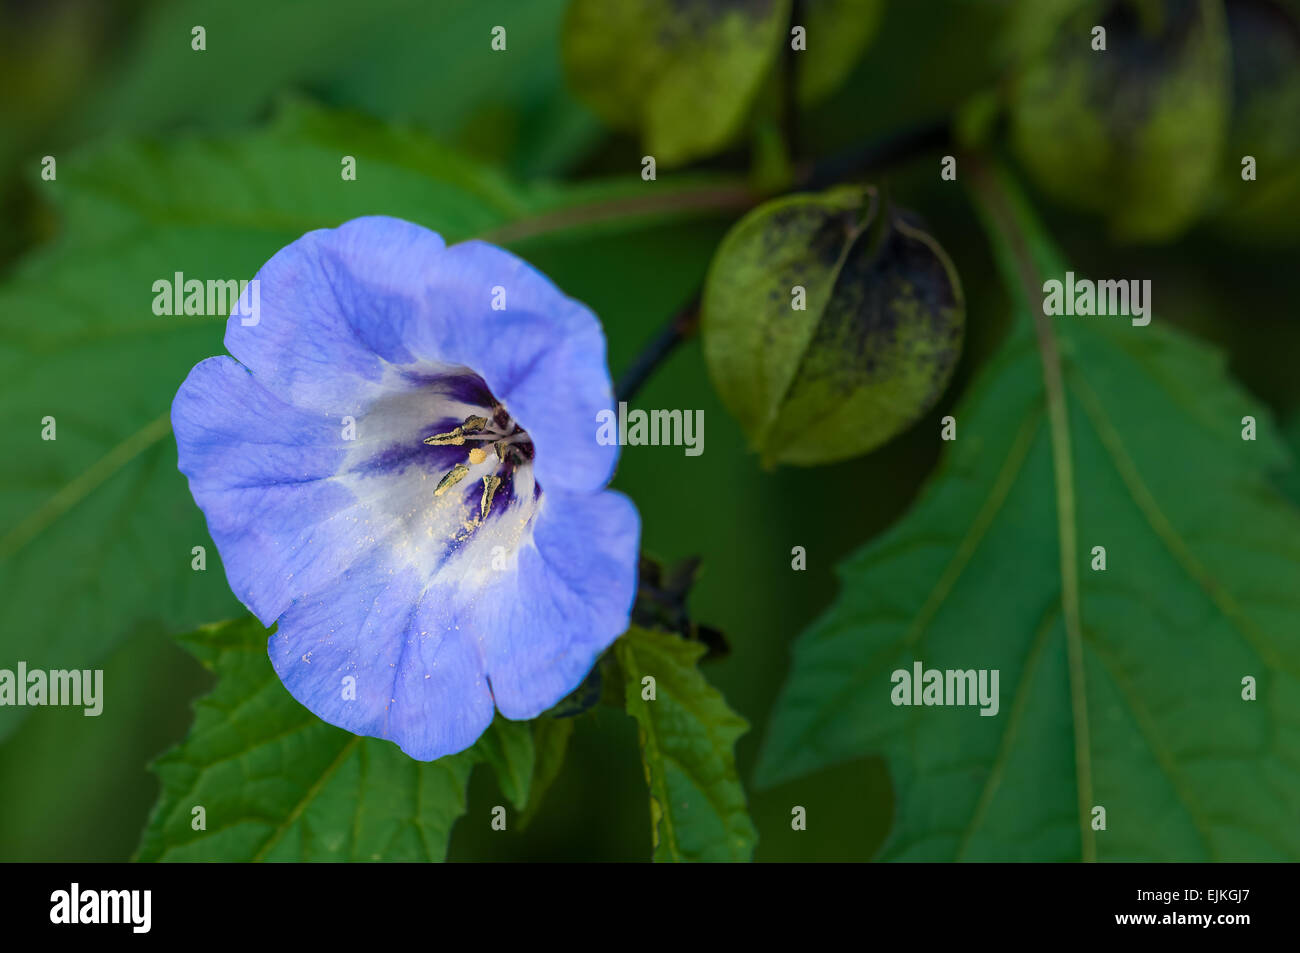 Shoo fly plant nicandra physalodes blue bell like flower Stock Photo